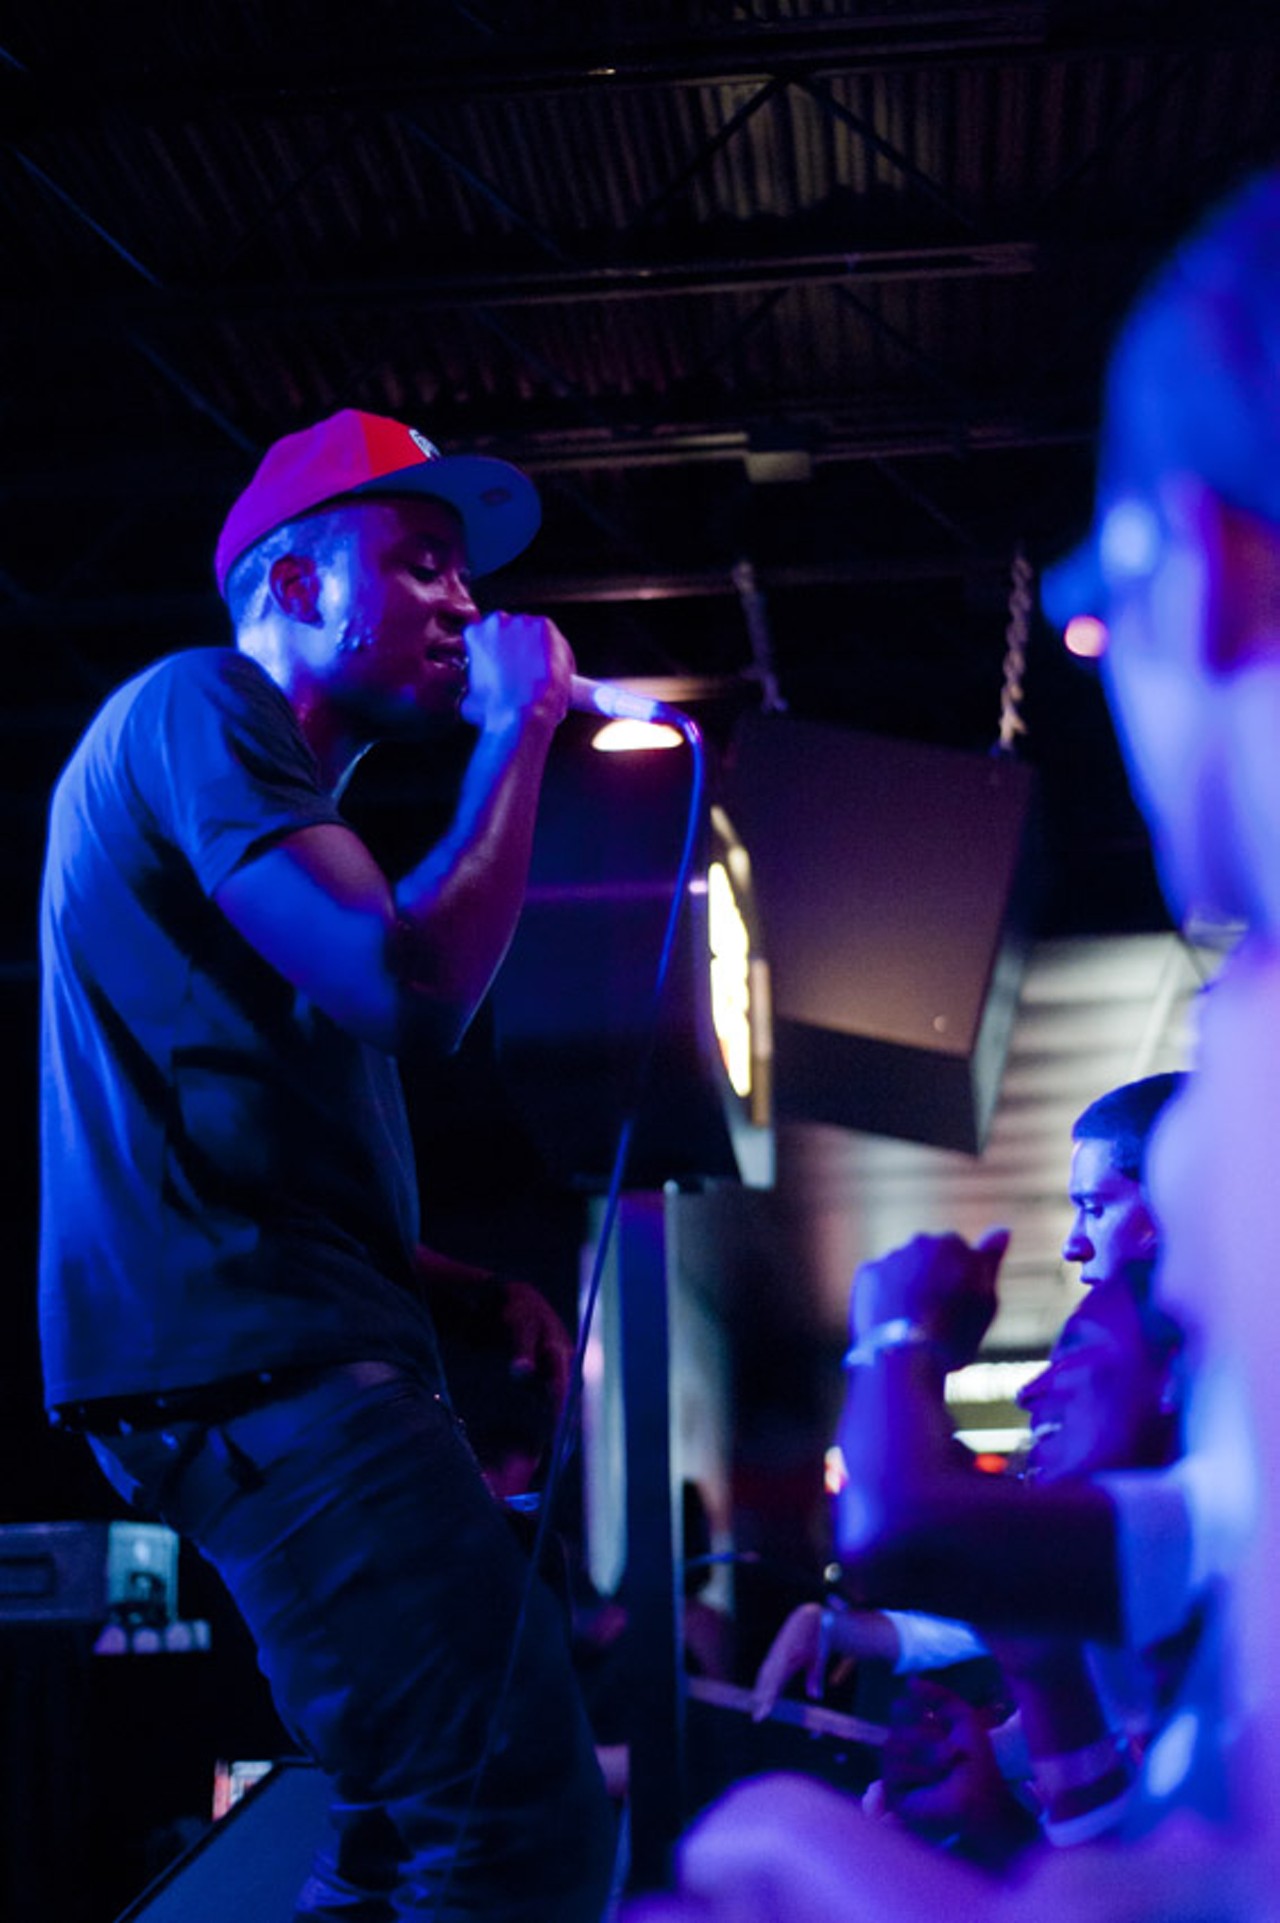 Chiddy Bang treats the crowd at the Firebird to a free show.